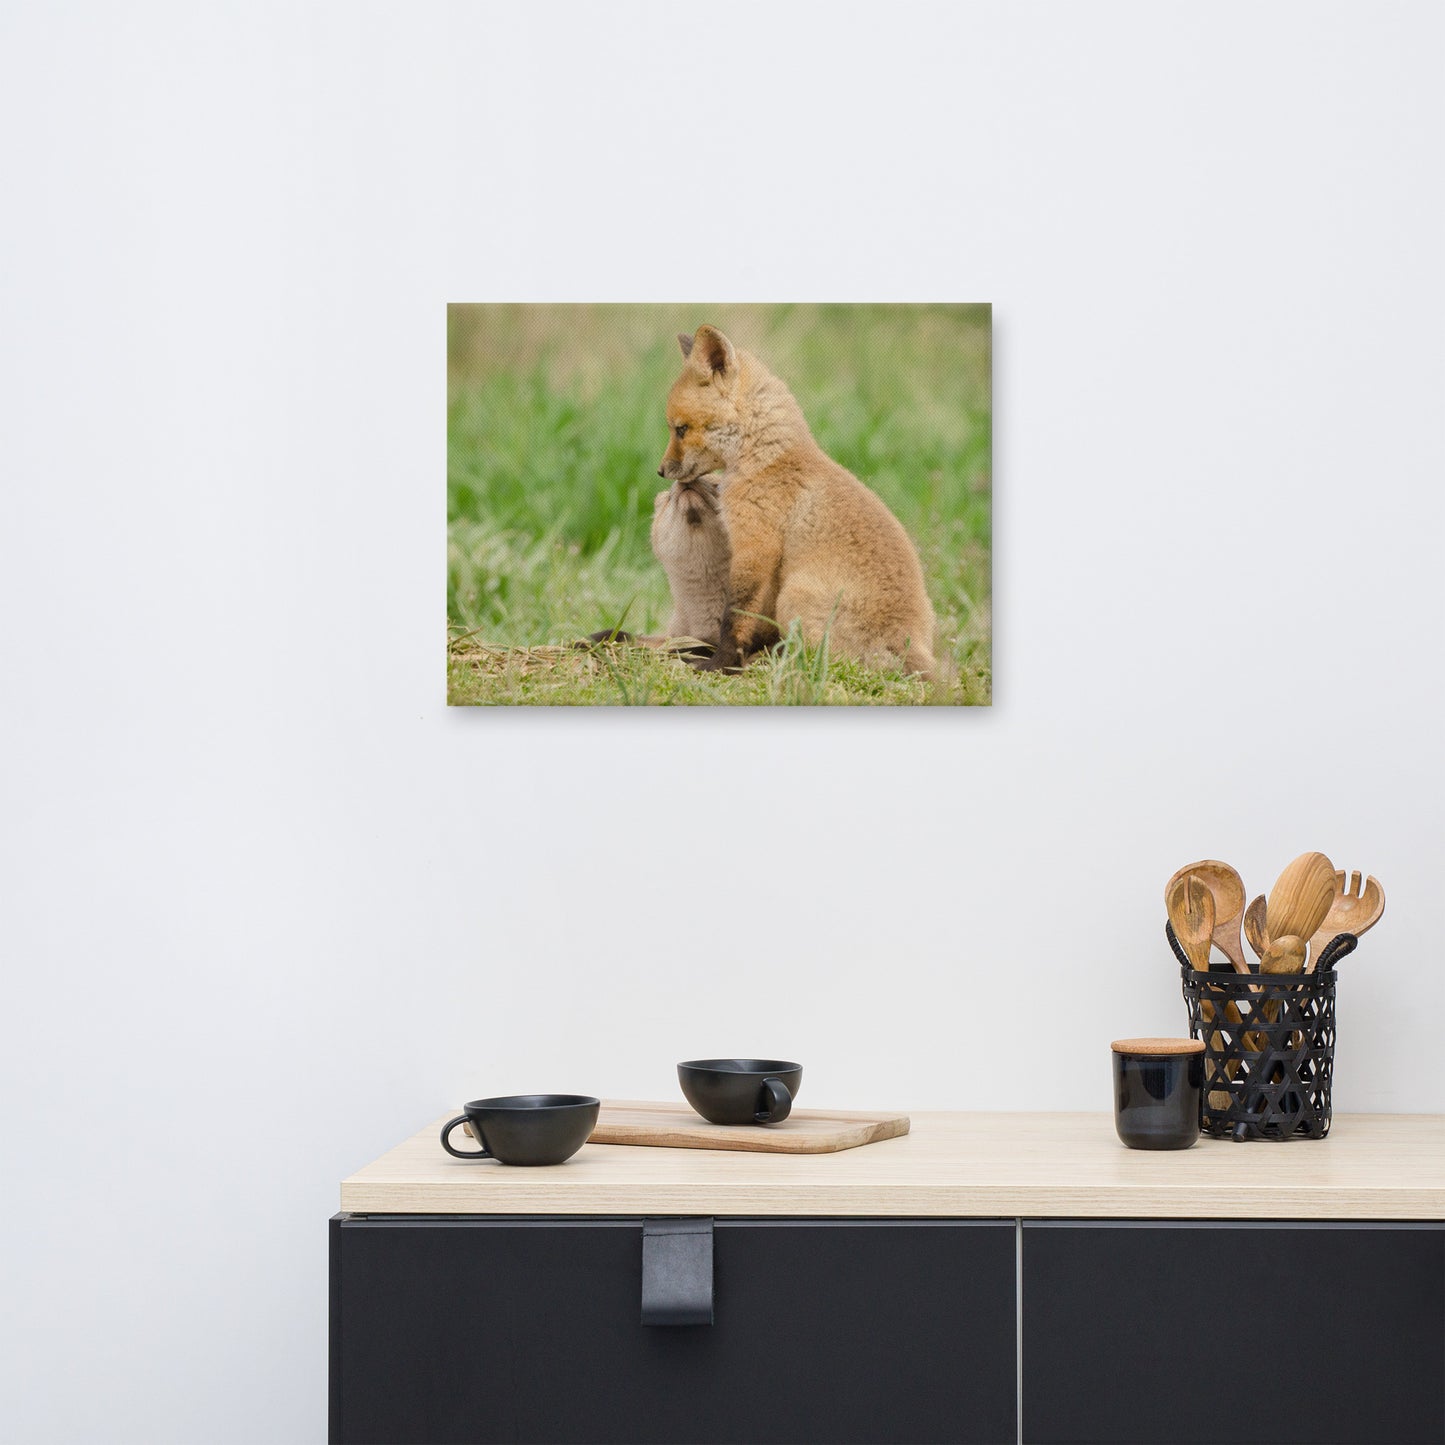 Baby Red Foxes Sibling Kisses Animal Wildlife Photograph Canvas Wall Art Prints